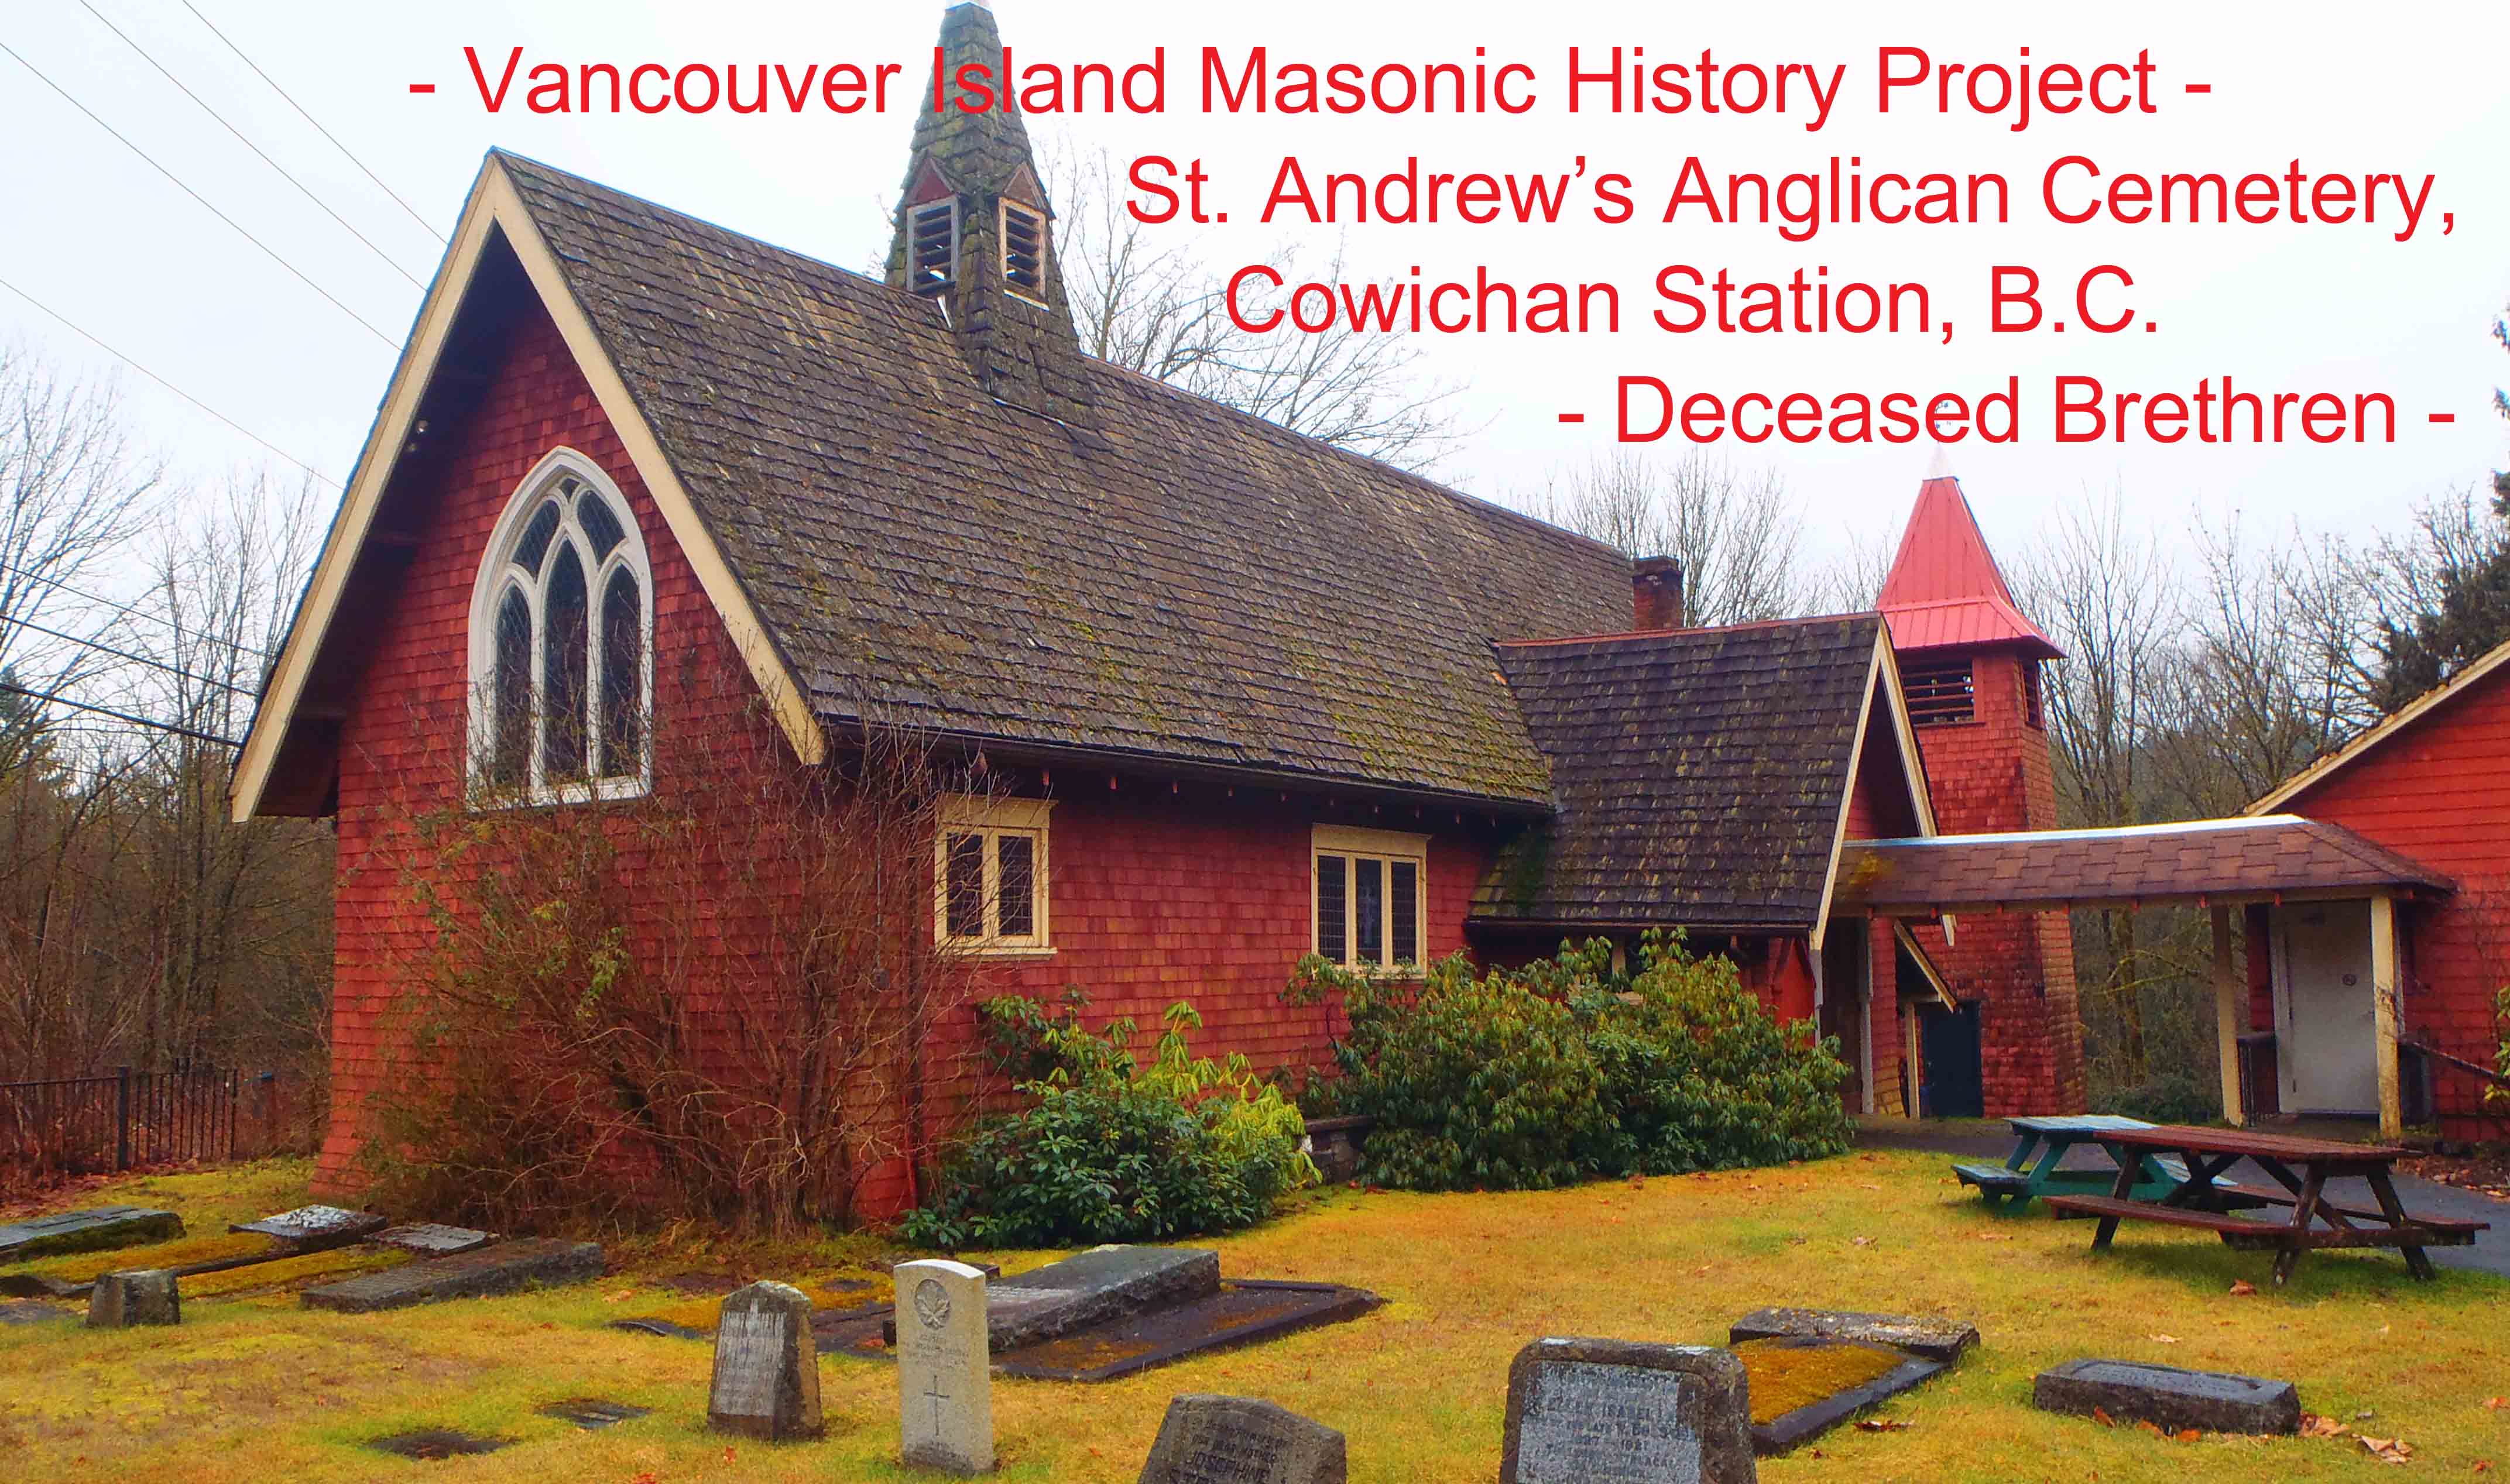 Saint Andrews Anglican cemetery, Cowichan Station - Deceased brethren